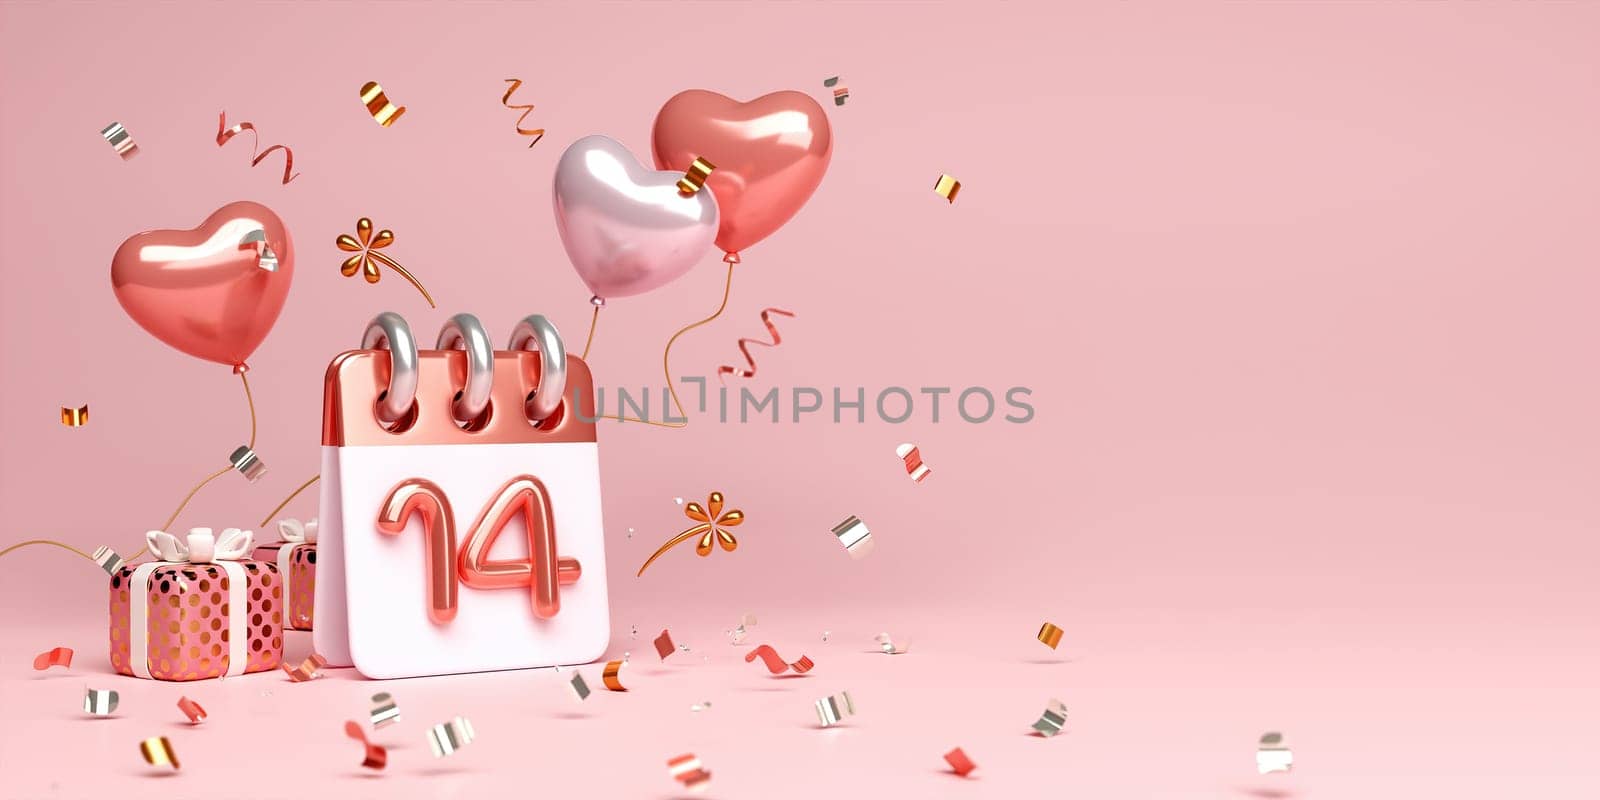 Happy Valentines day background with calendar date 14 February, Rose gold luxury, gift box, glitter, heart shape balloon, copy space text, 3D rendering illustration by meepiangraphic